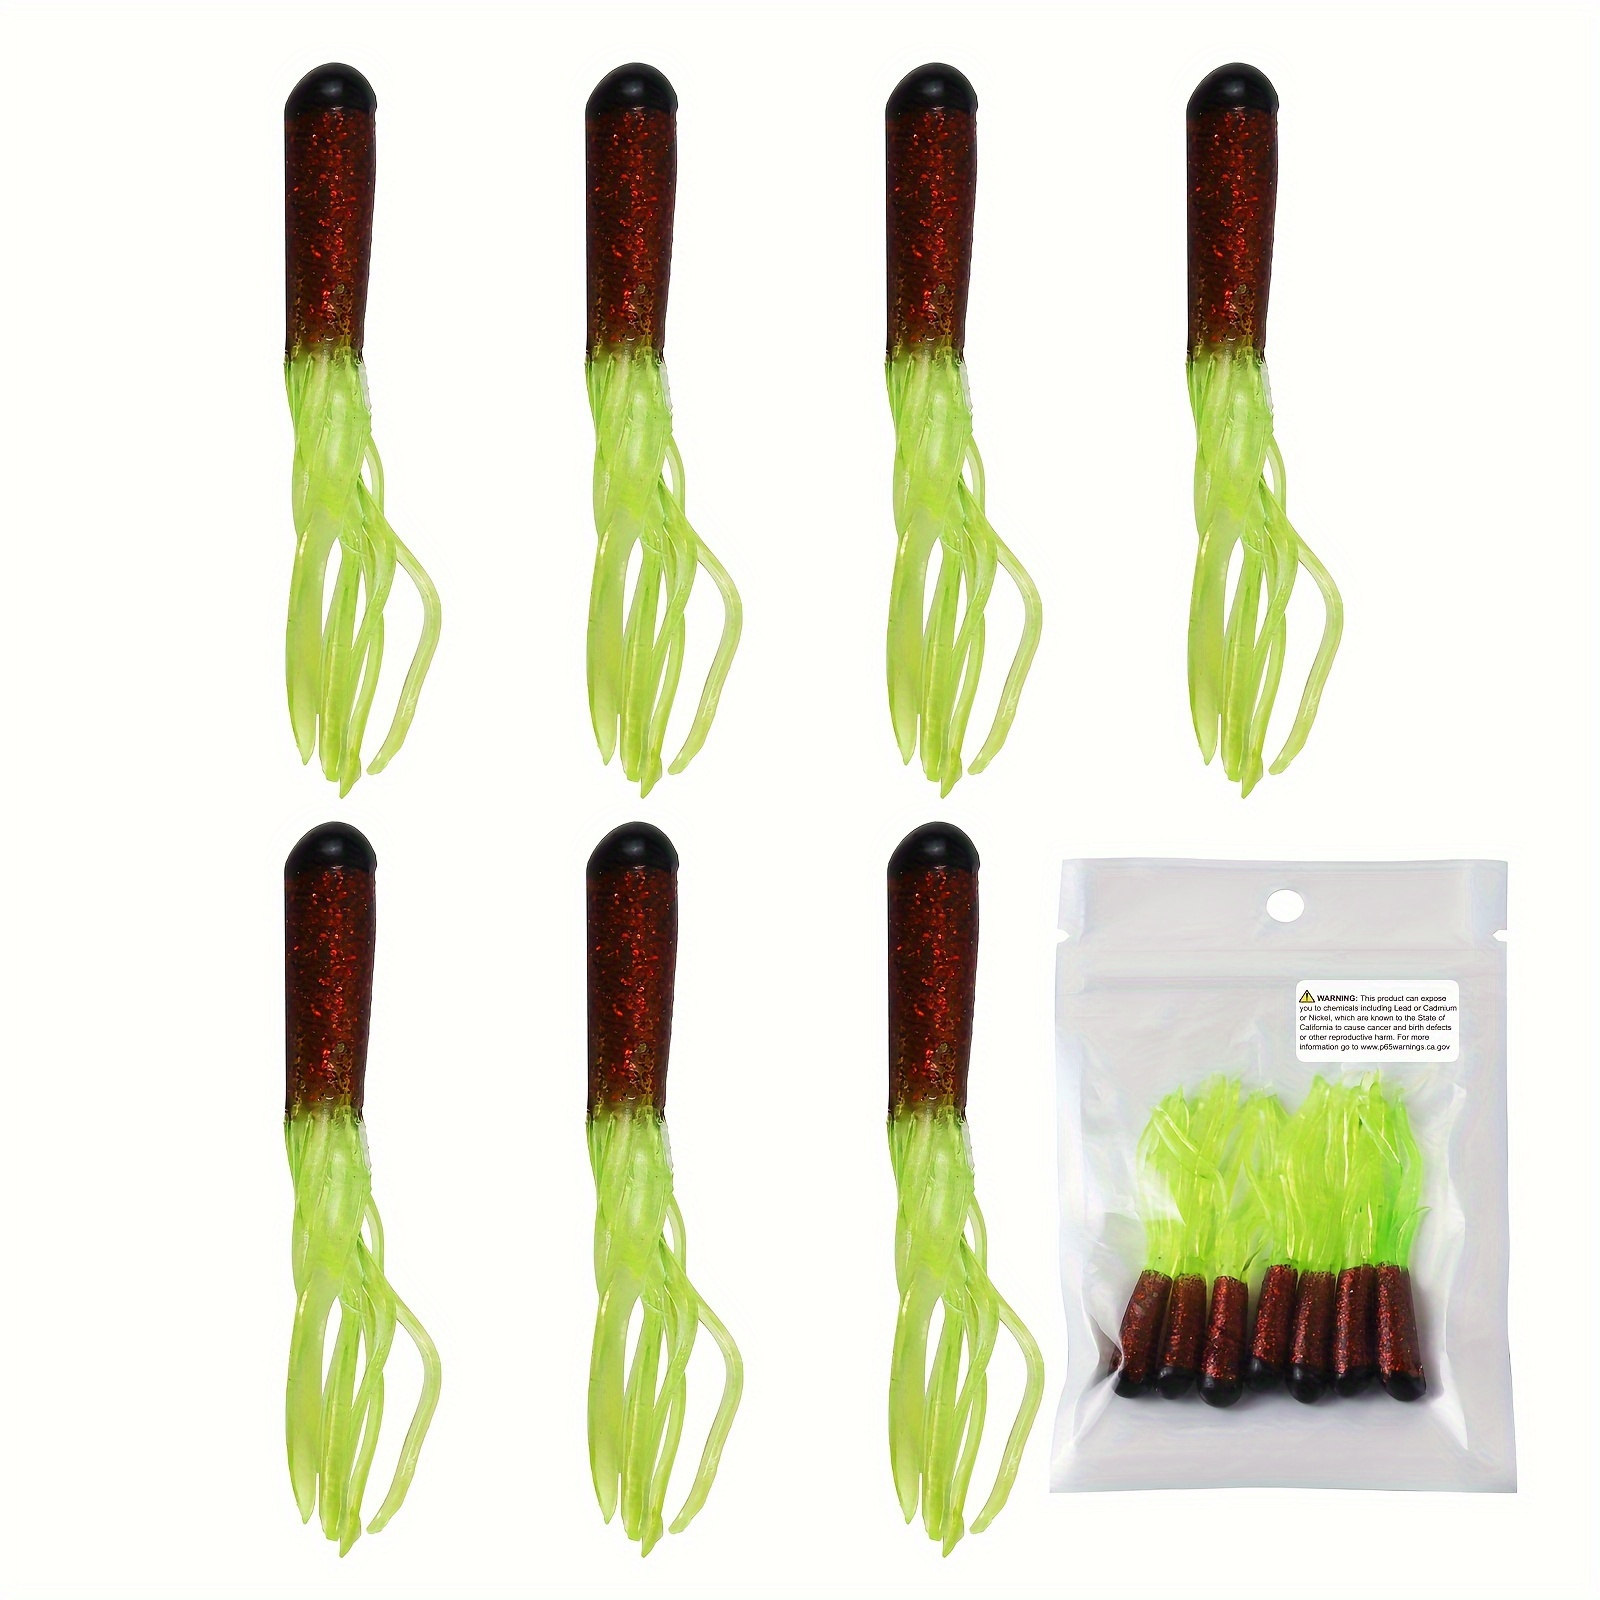 7pcs Tube Baits, Soft Fishing Lure, Bionic Grub Worm For Bass Crappie  Trout, Fishing Tackle For Freshwater And Saltwater